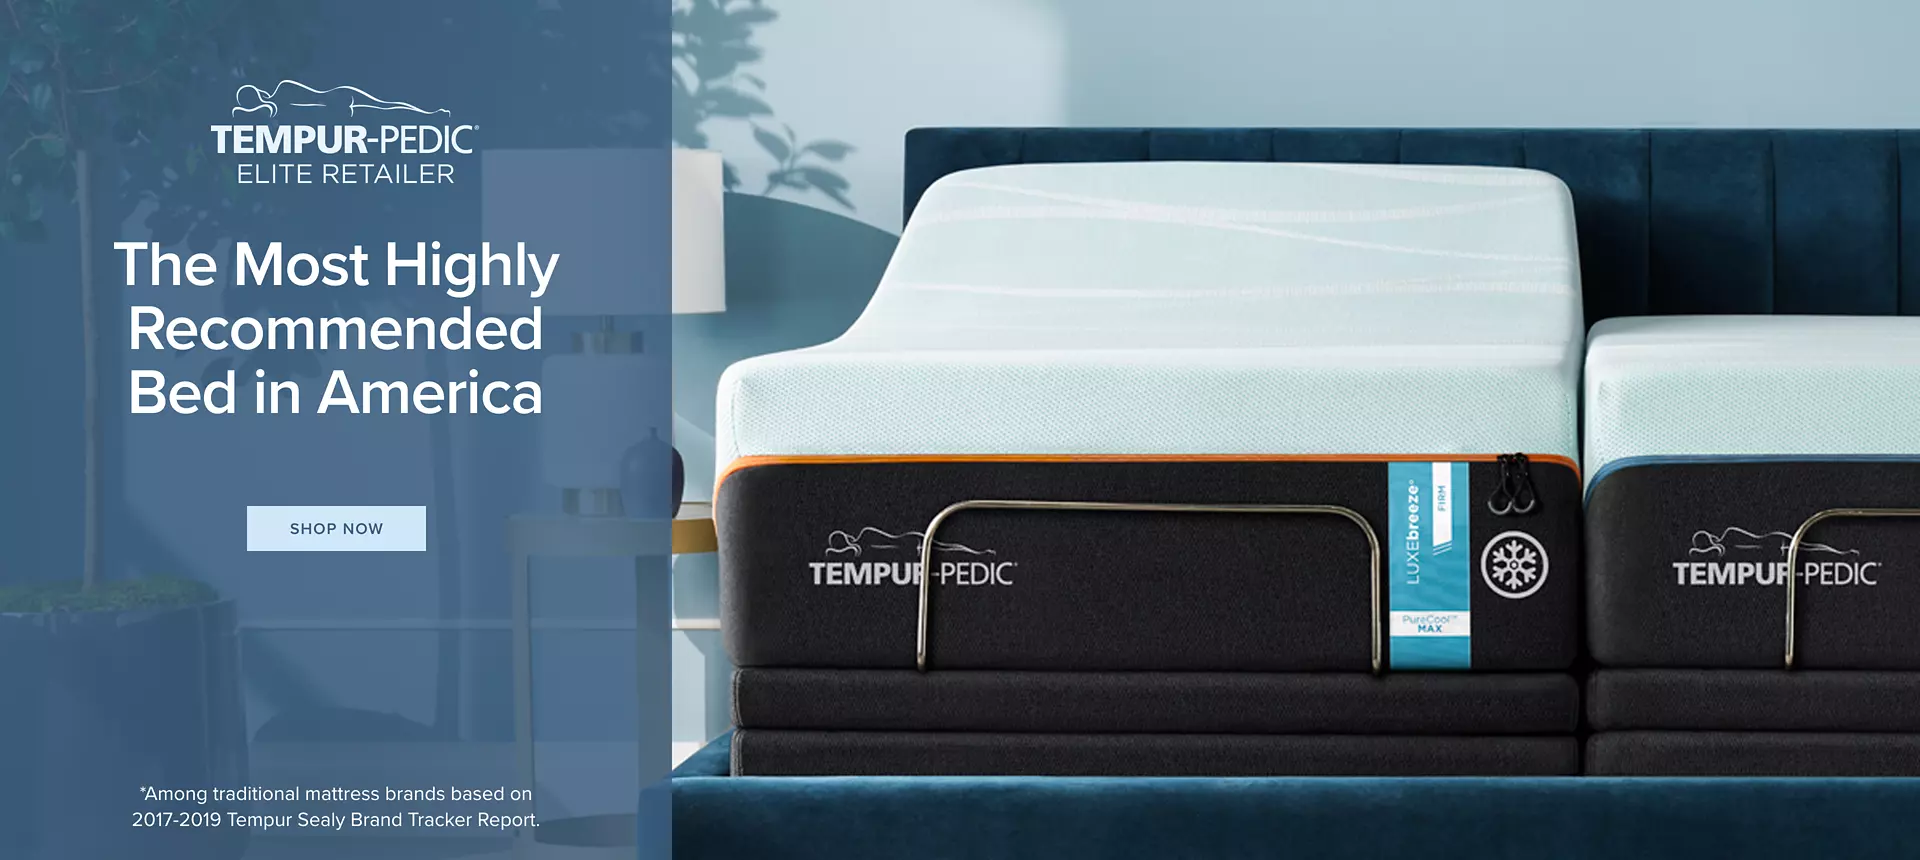 Tempur-Pedic Mattresses - The Most Recommended Bed In America - Shop Now